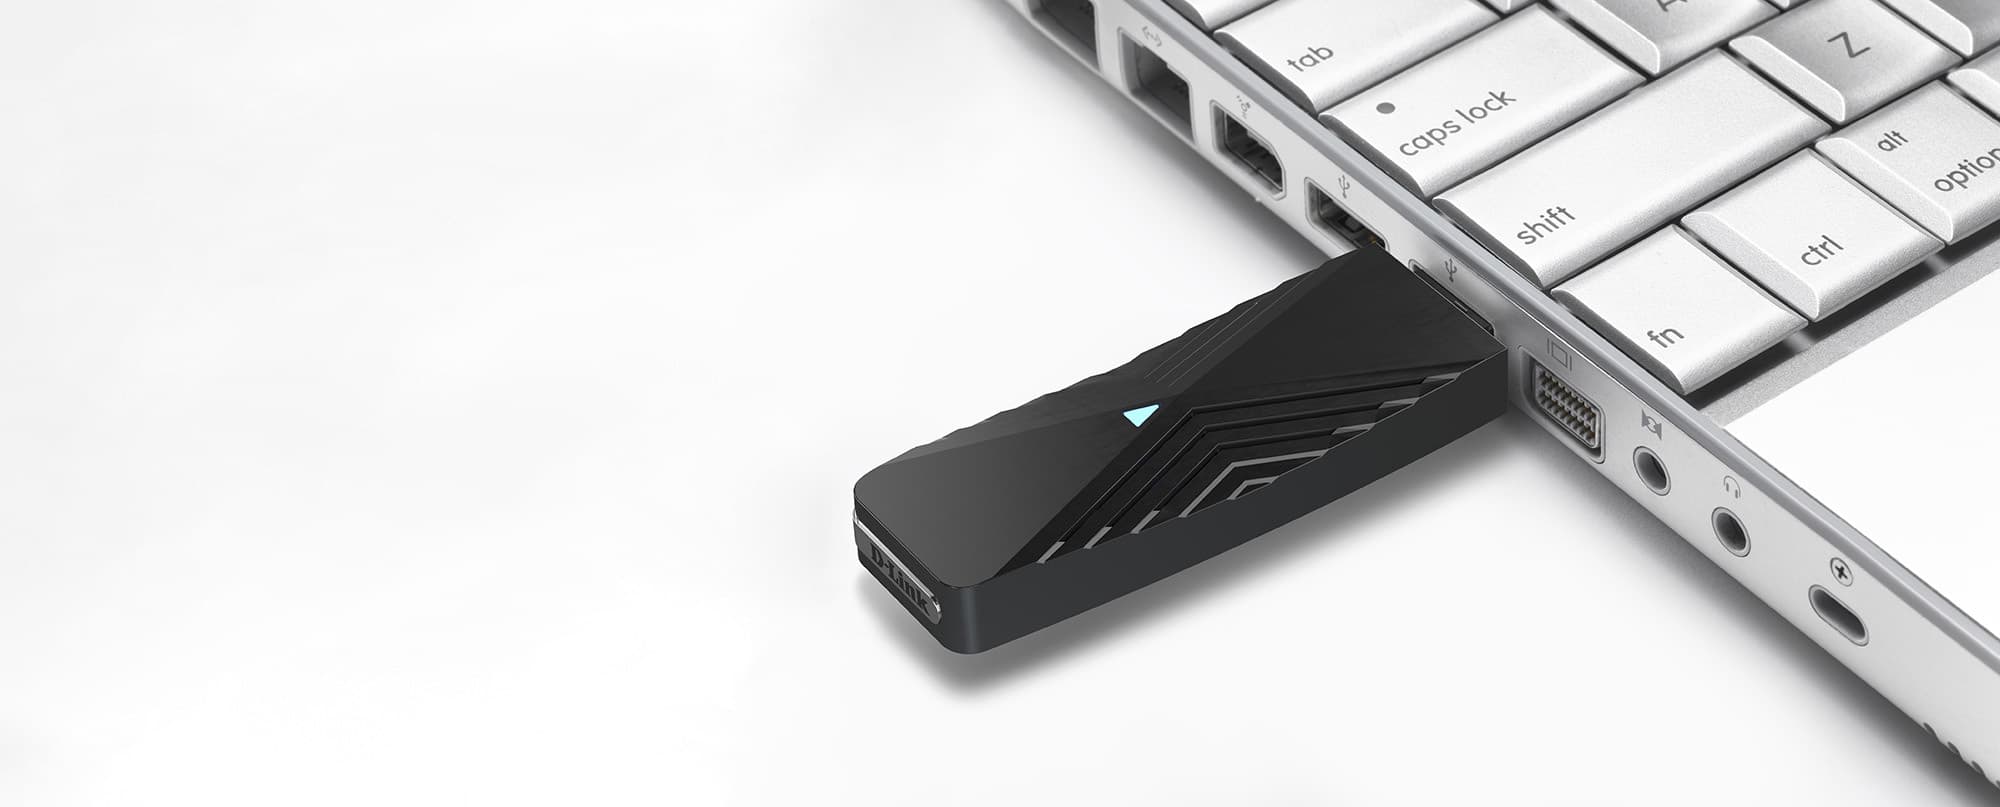 D-Link DWA-X1850 review: Usb-dongle met wifi 6